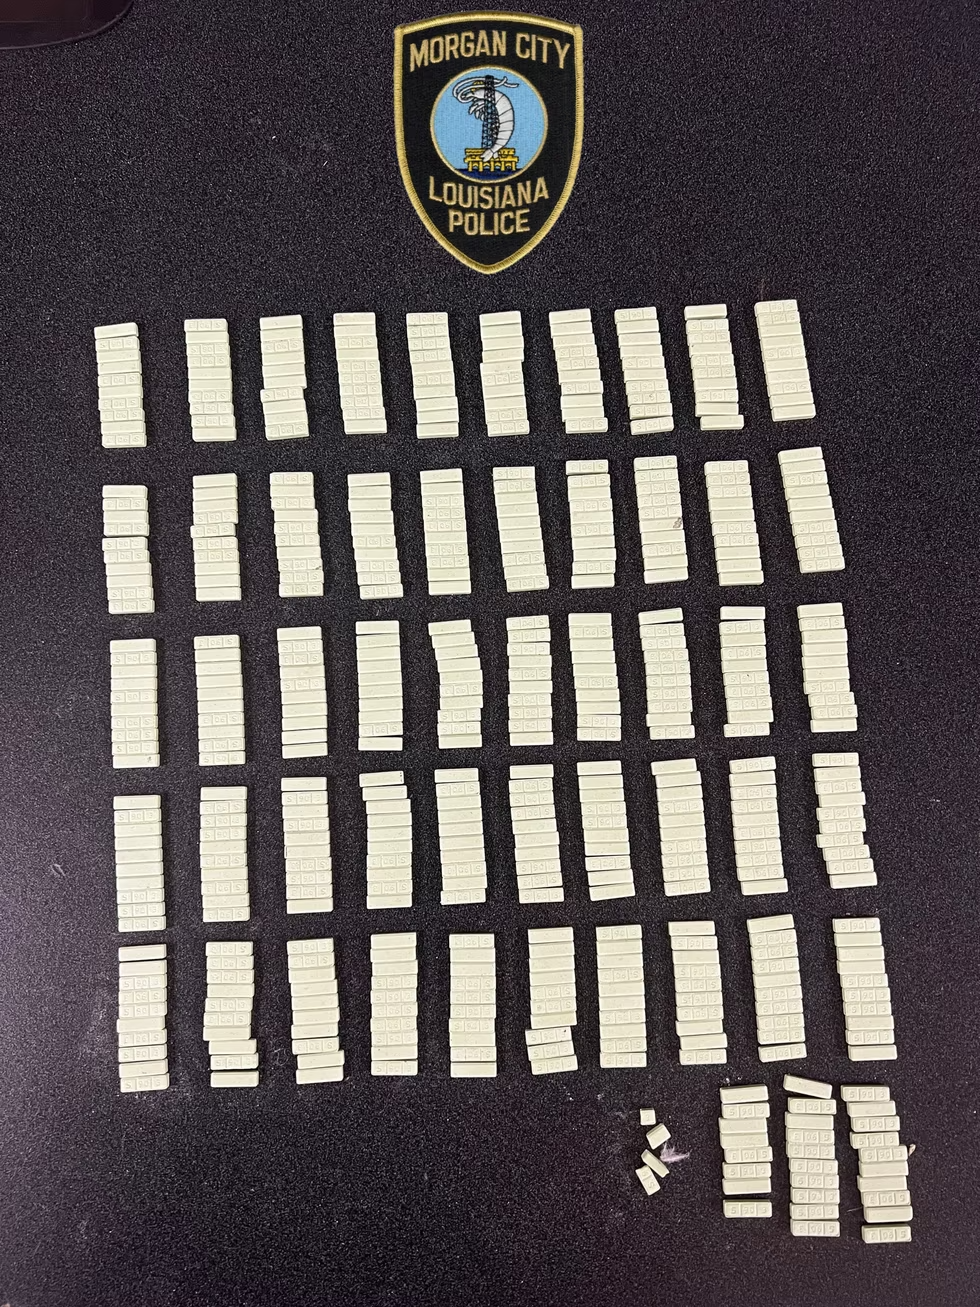 Alprazolam (Xanax) bars laid out on a table with a Morgan City Police Department above them.